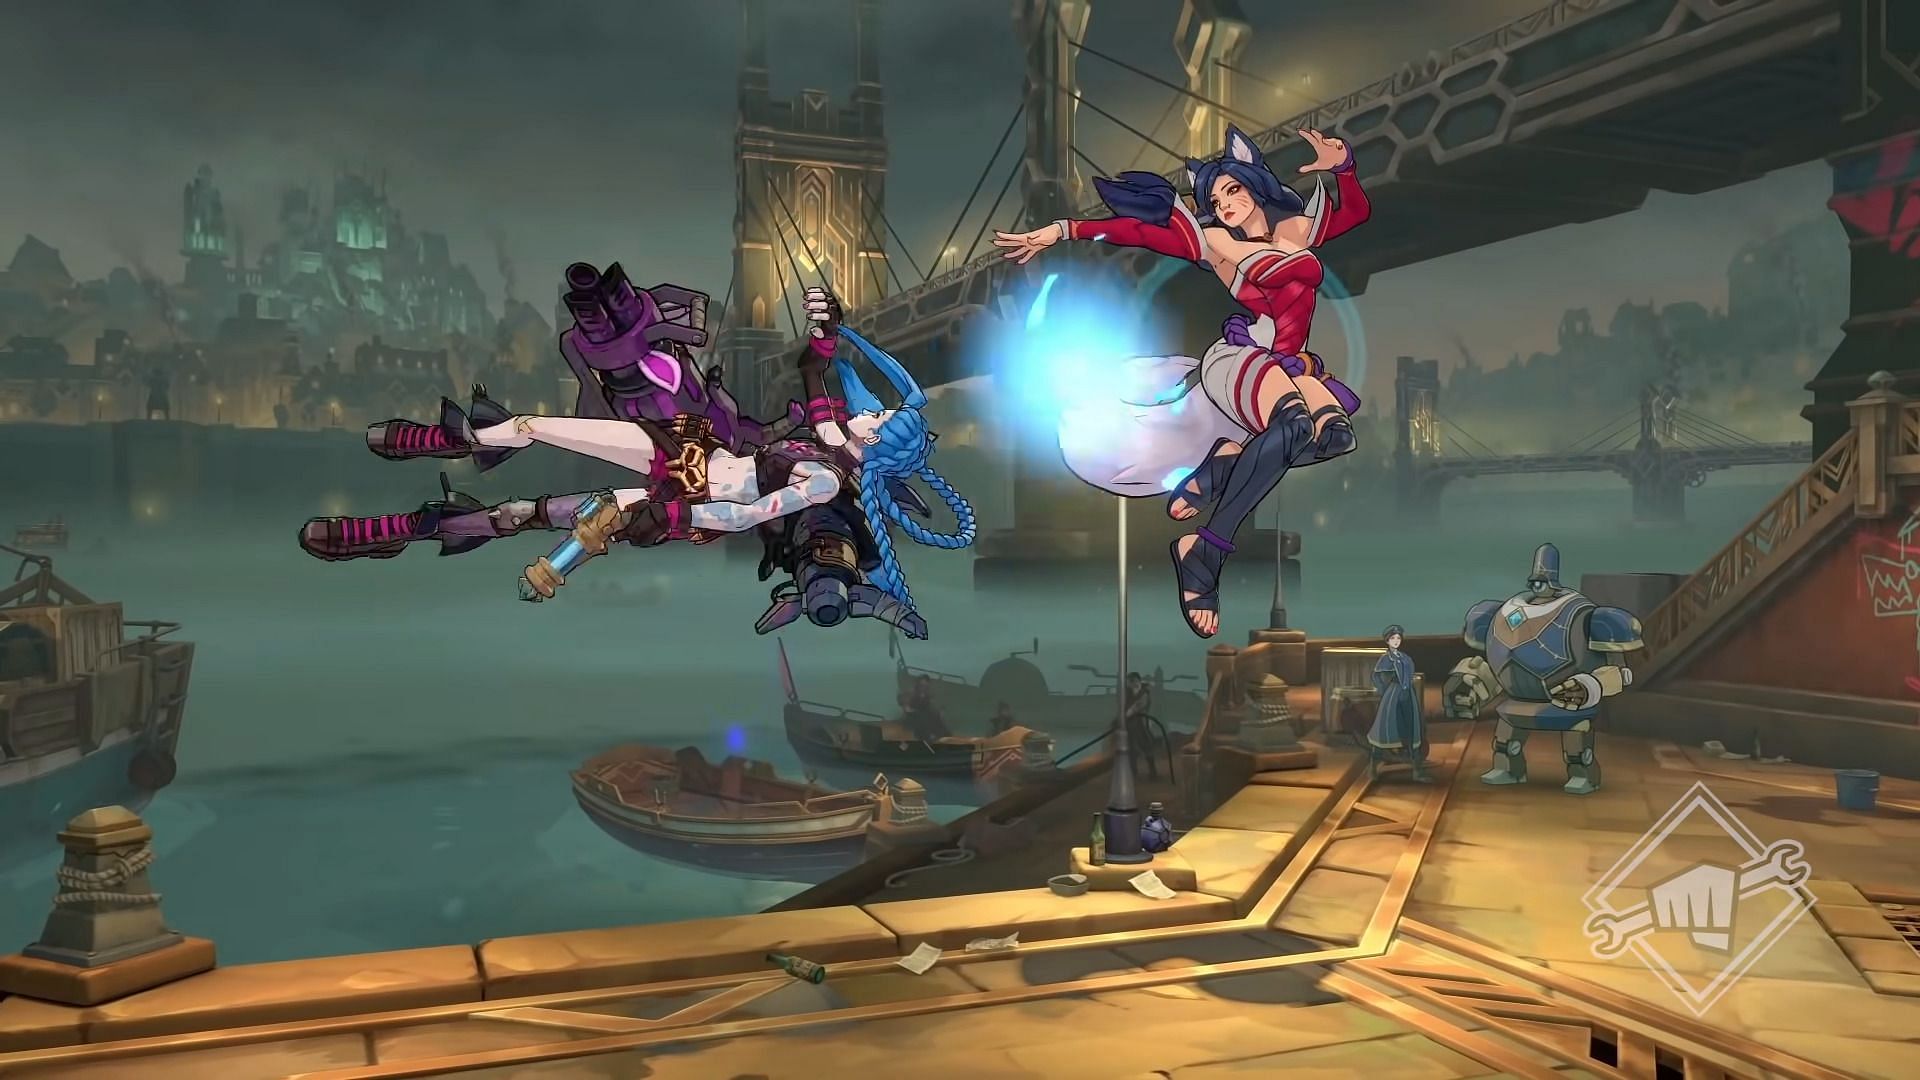 More info for Riot&#039;s upcoming Fighting Game is revealed (Image via Riot Games)